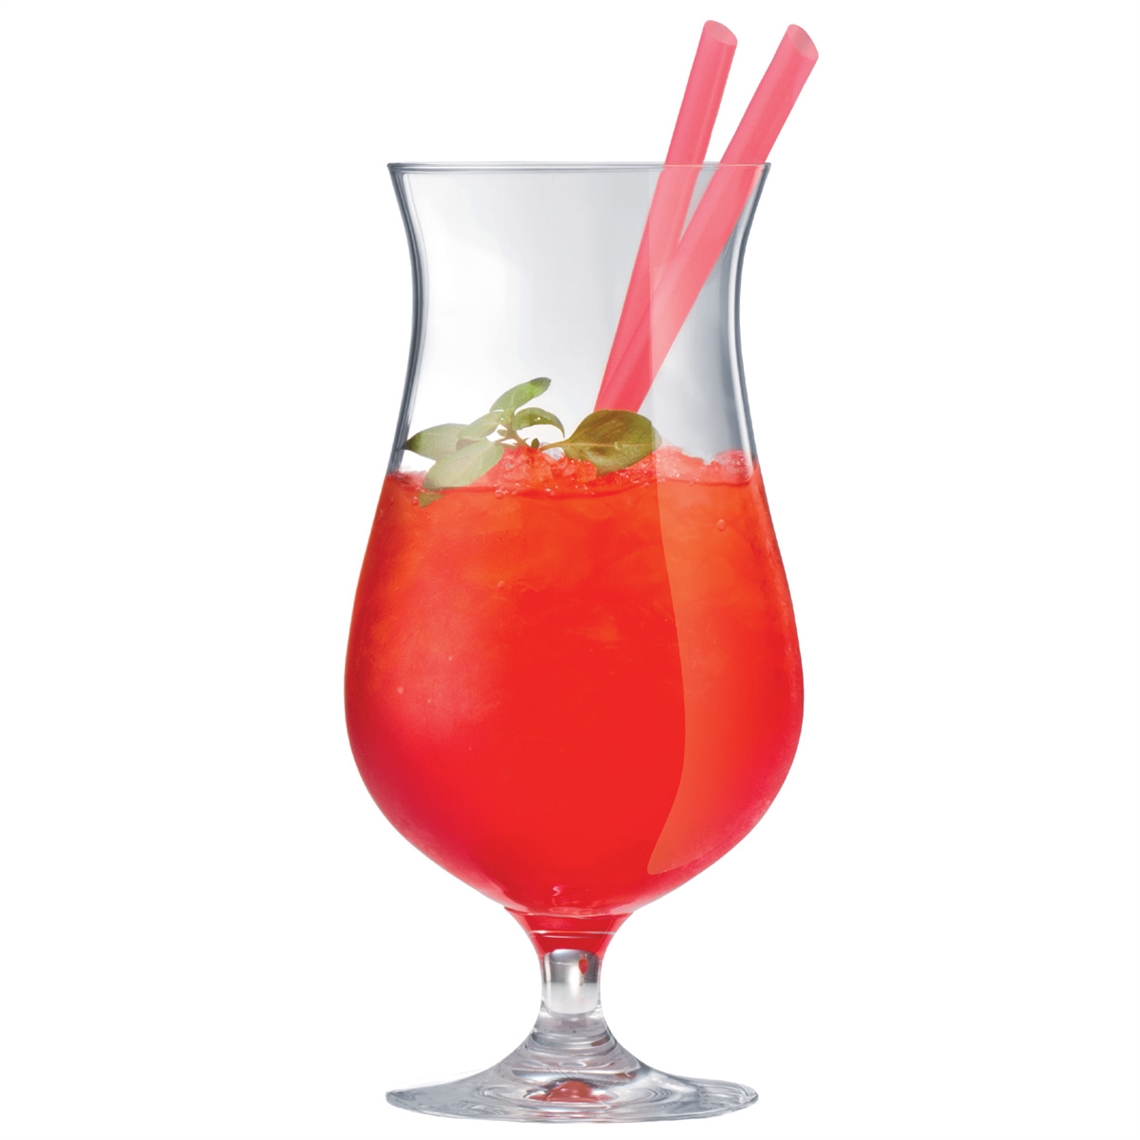 View more glass hire from our Cocktail Glasses range